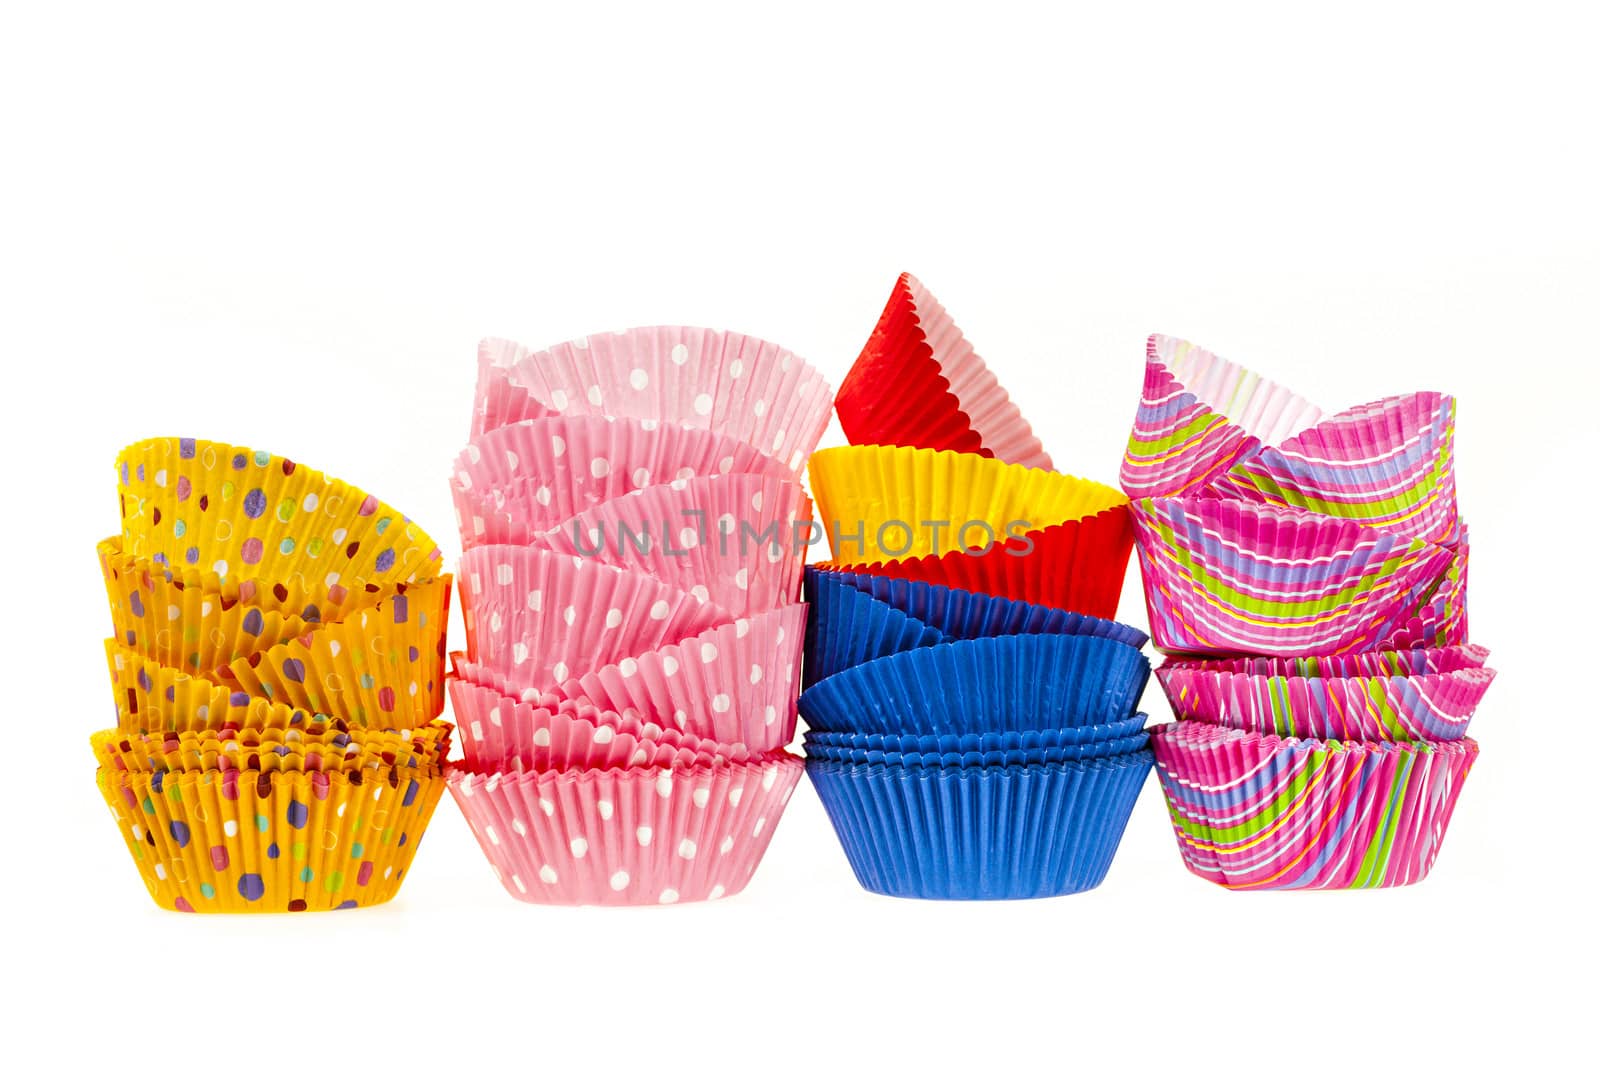 Several stacks of colorful muffin or cupcake cups isolated on white background